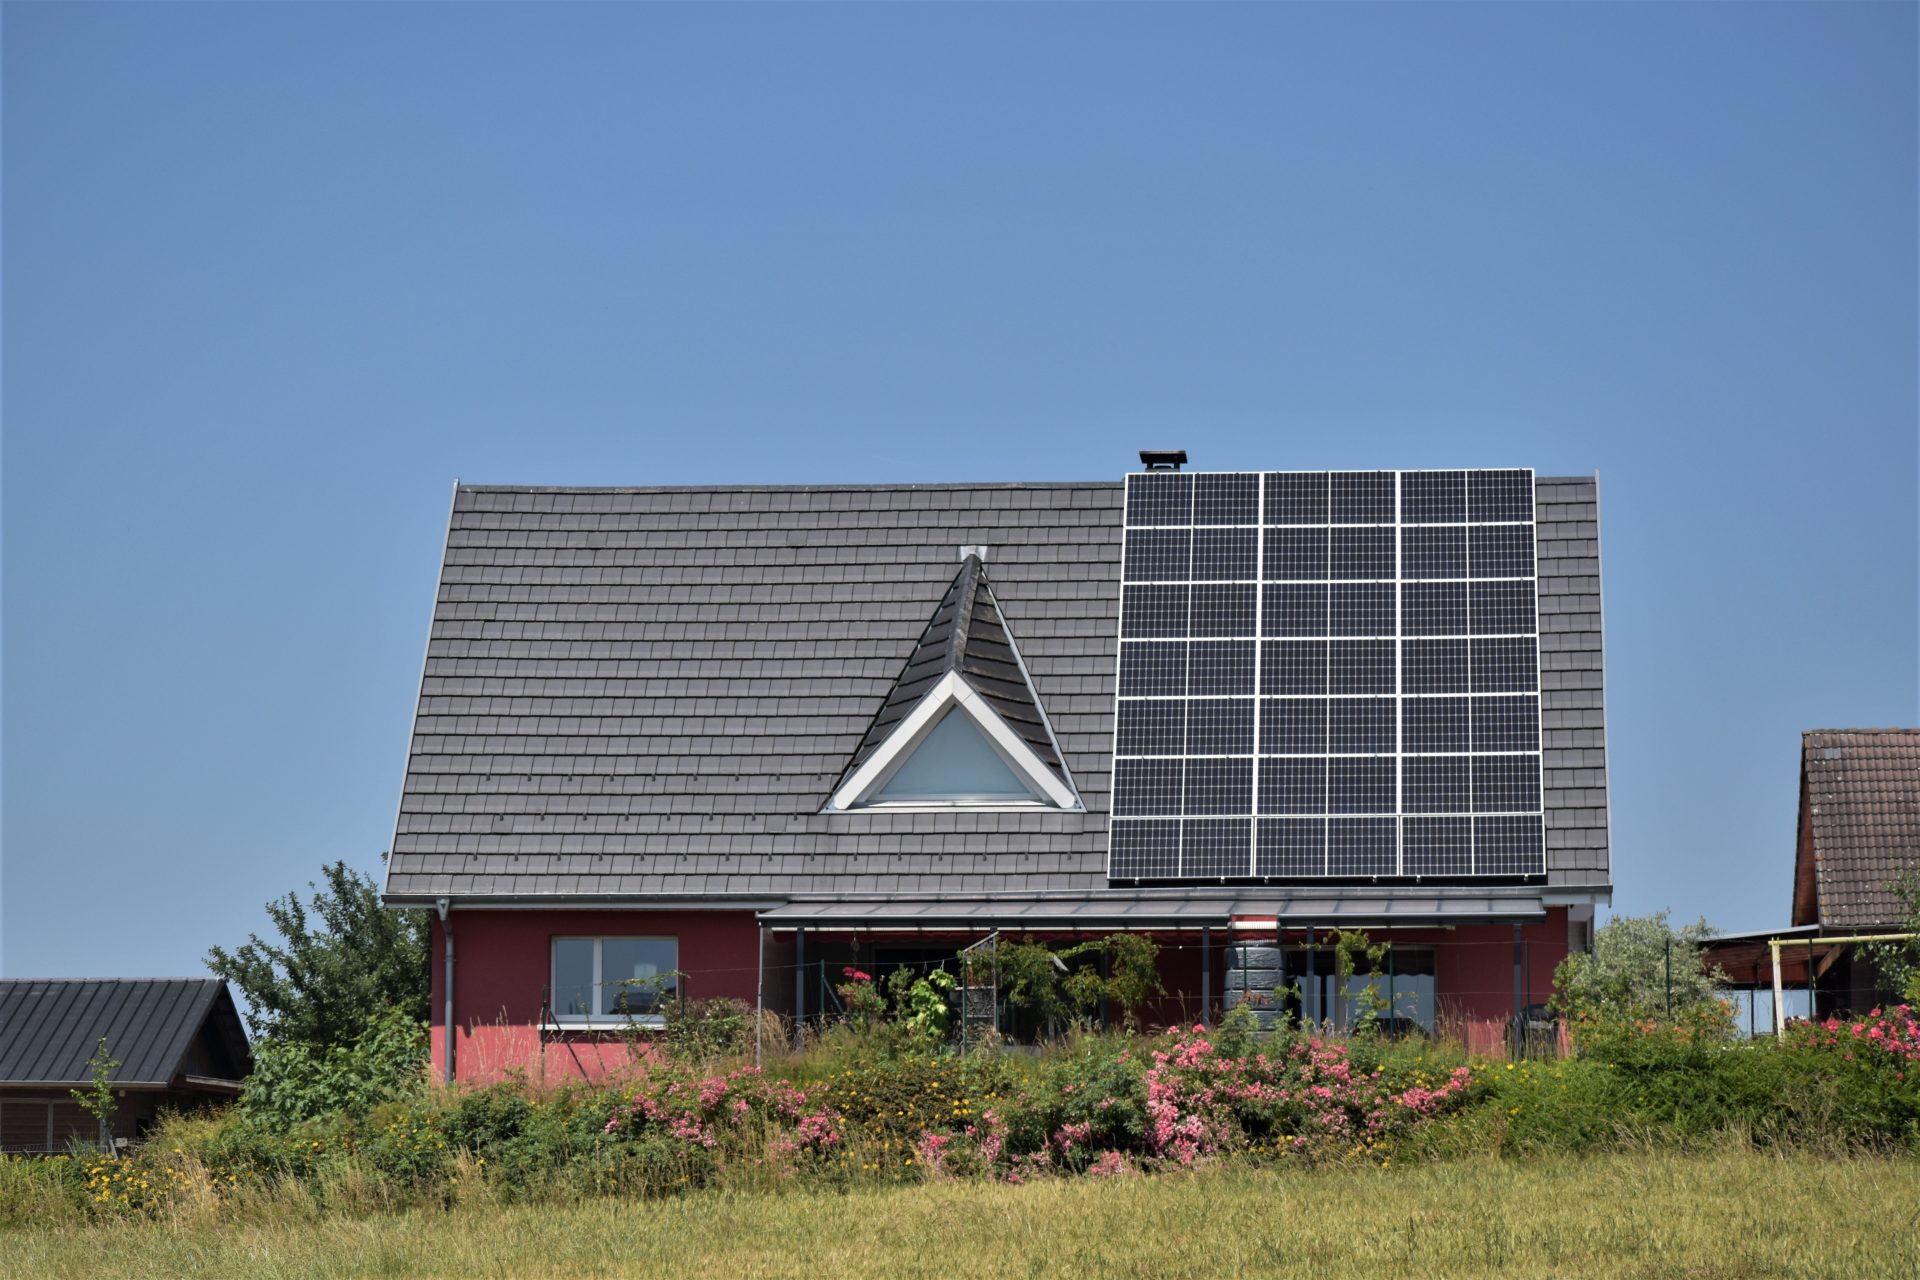 Half of the pitched roof of a detached house is covered with solar panels.